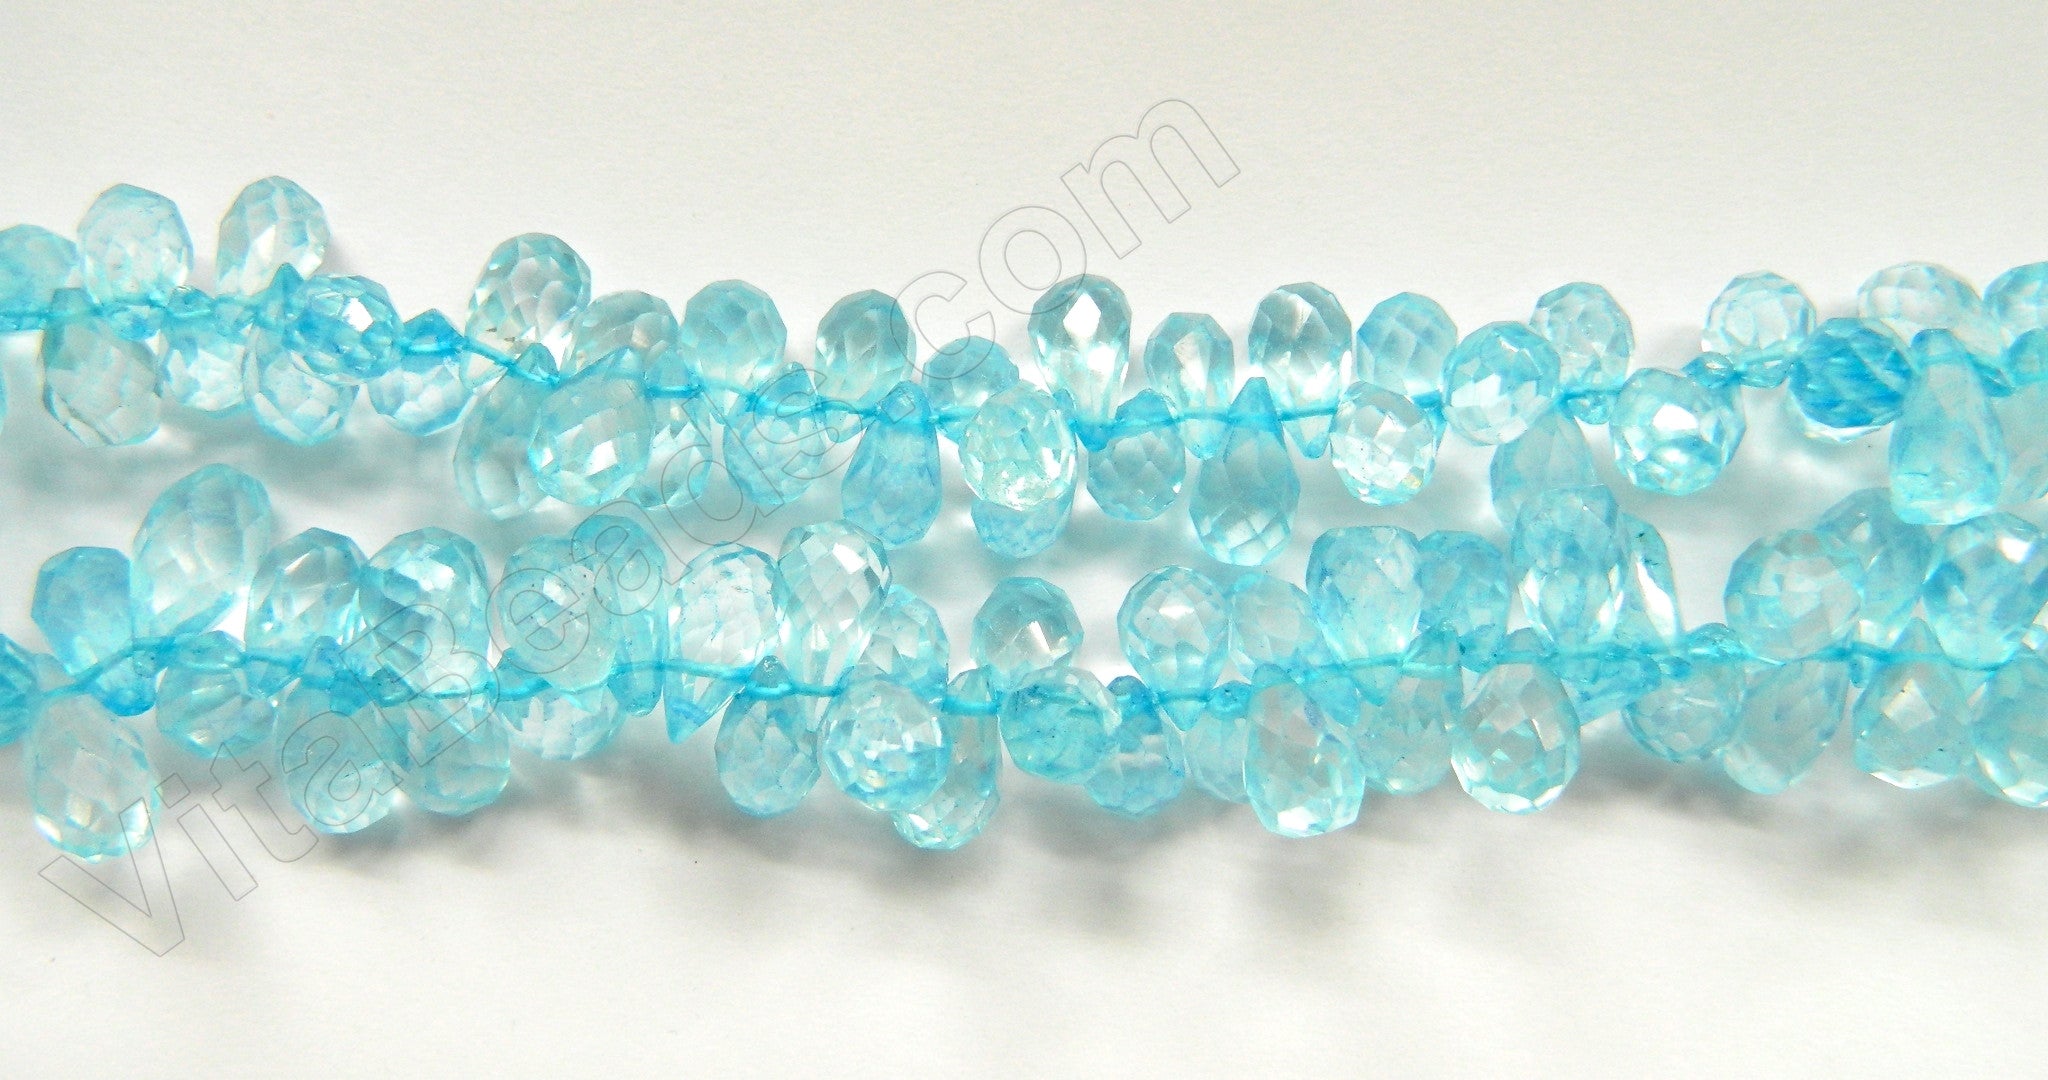 Sky Blue Topaz  -  dyed - 7-12mm Faceted Teardrop Head Drill 15"